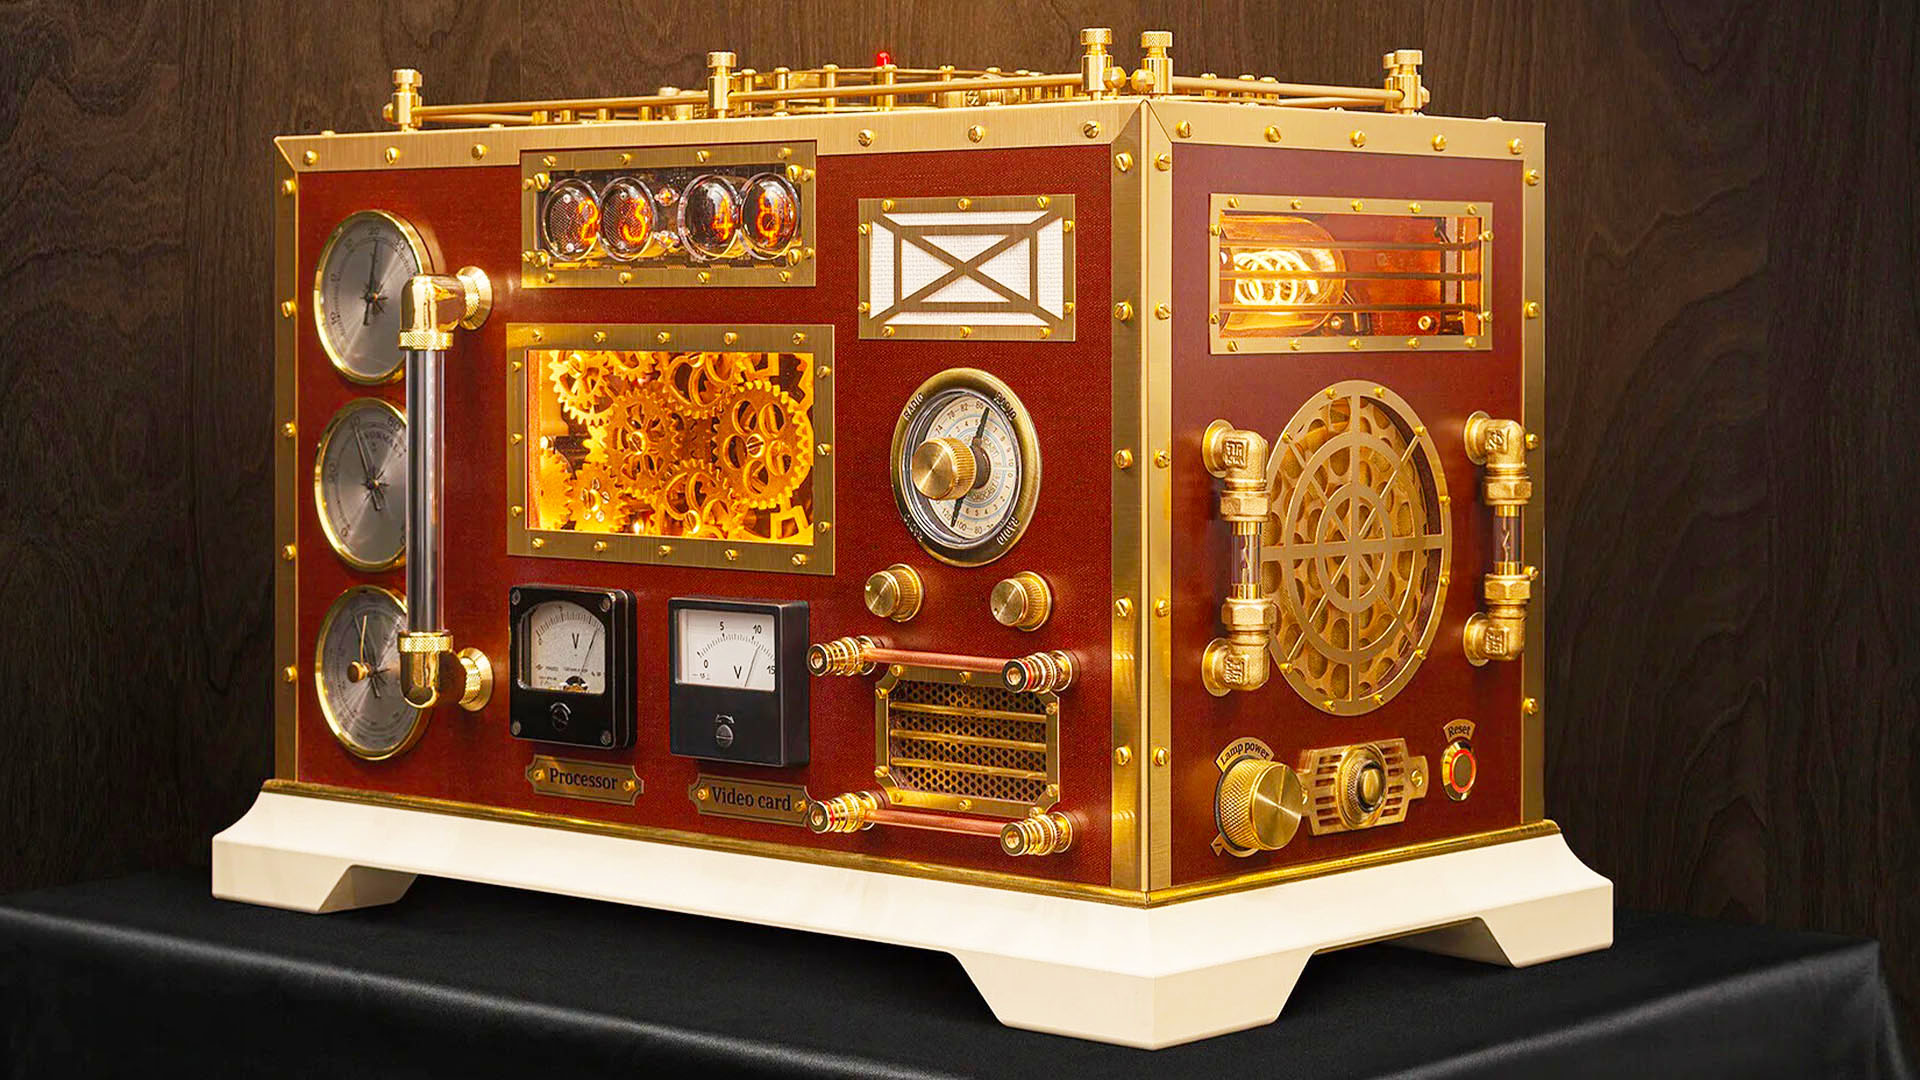 This stunning steampunk PC took 34 people to build